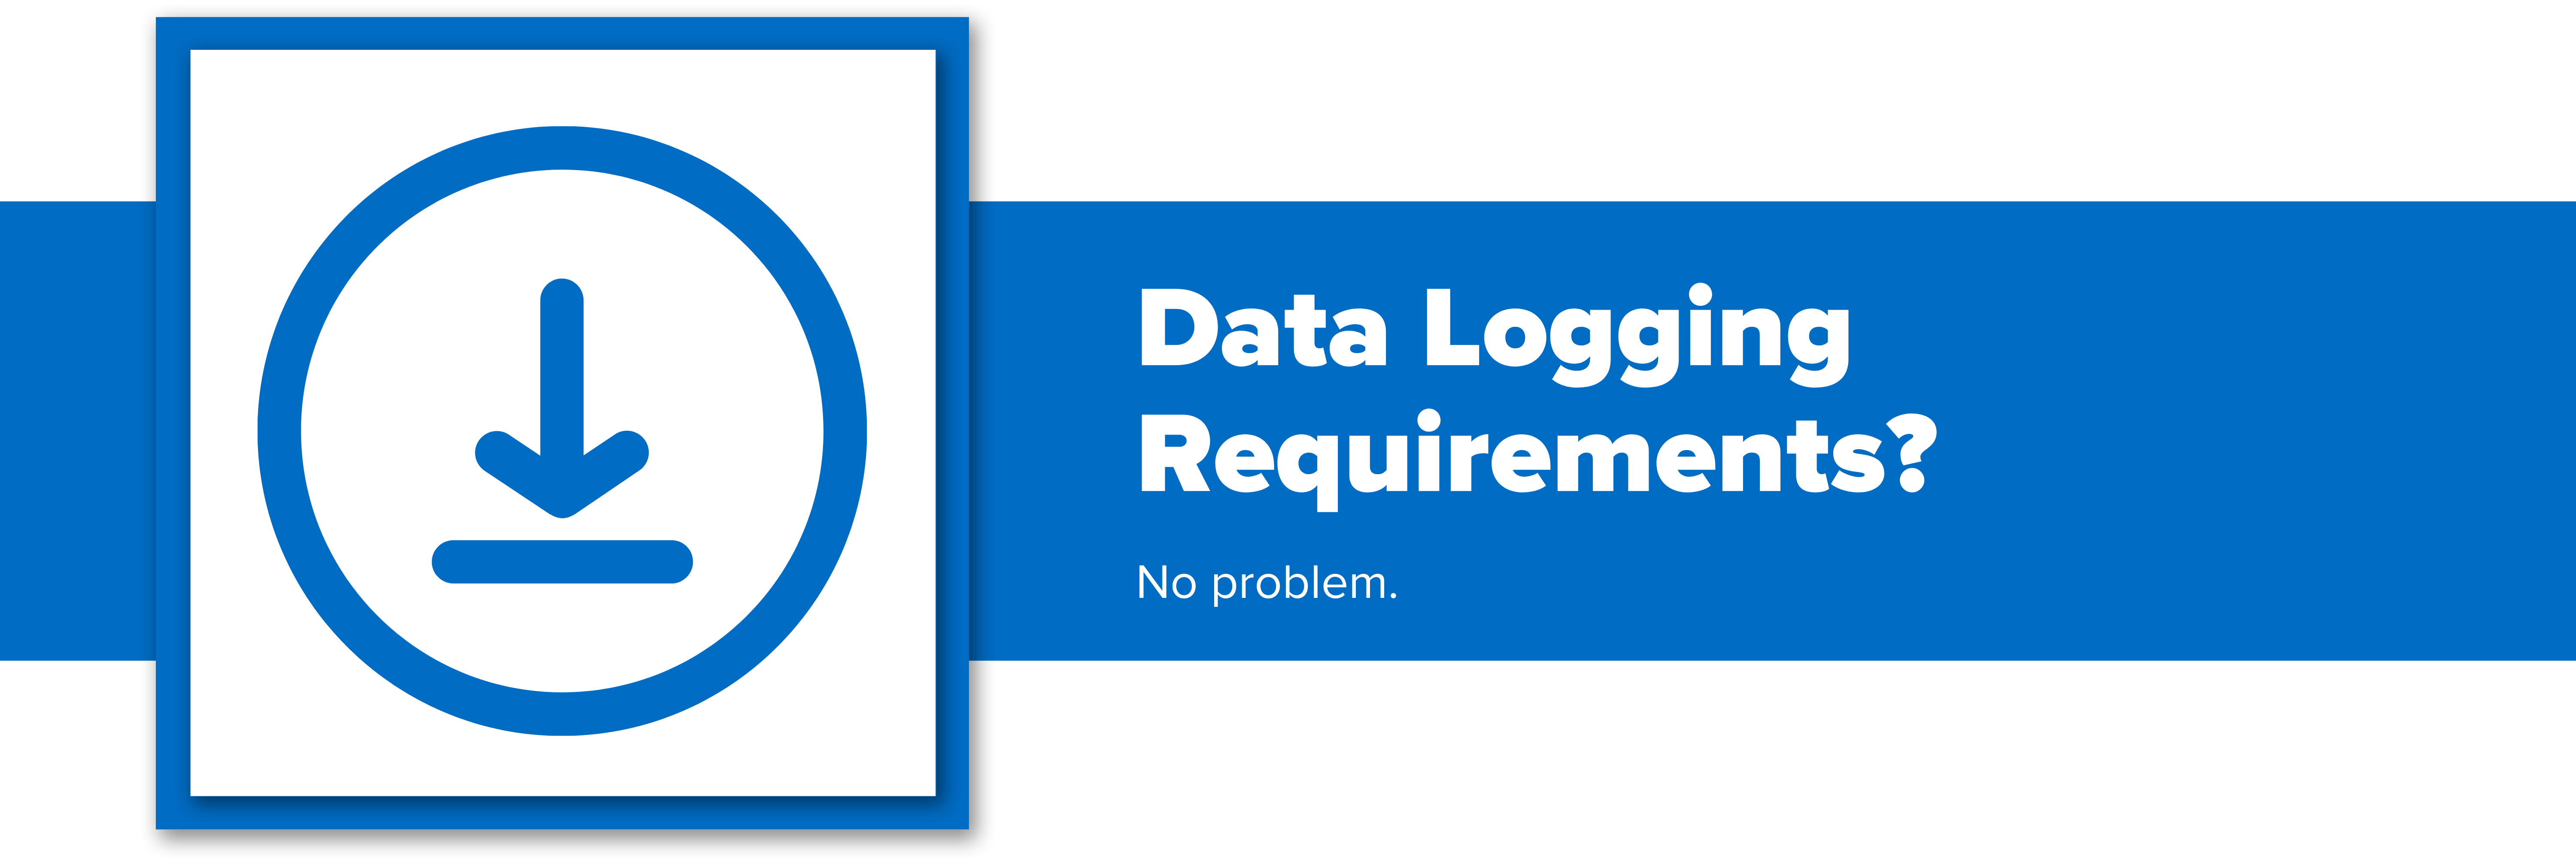 Header image with text "Data Logging Requirements? No problem."